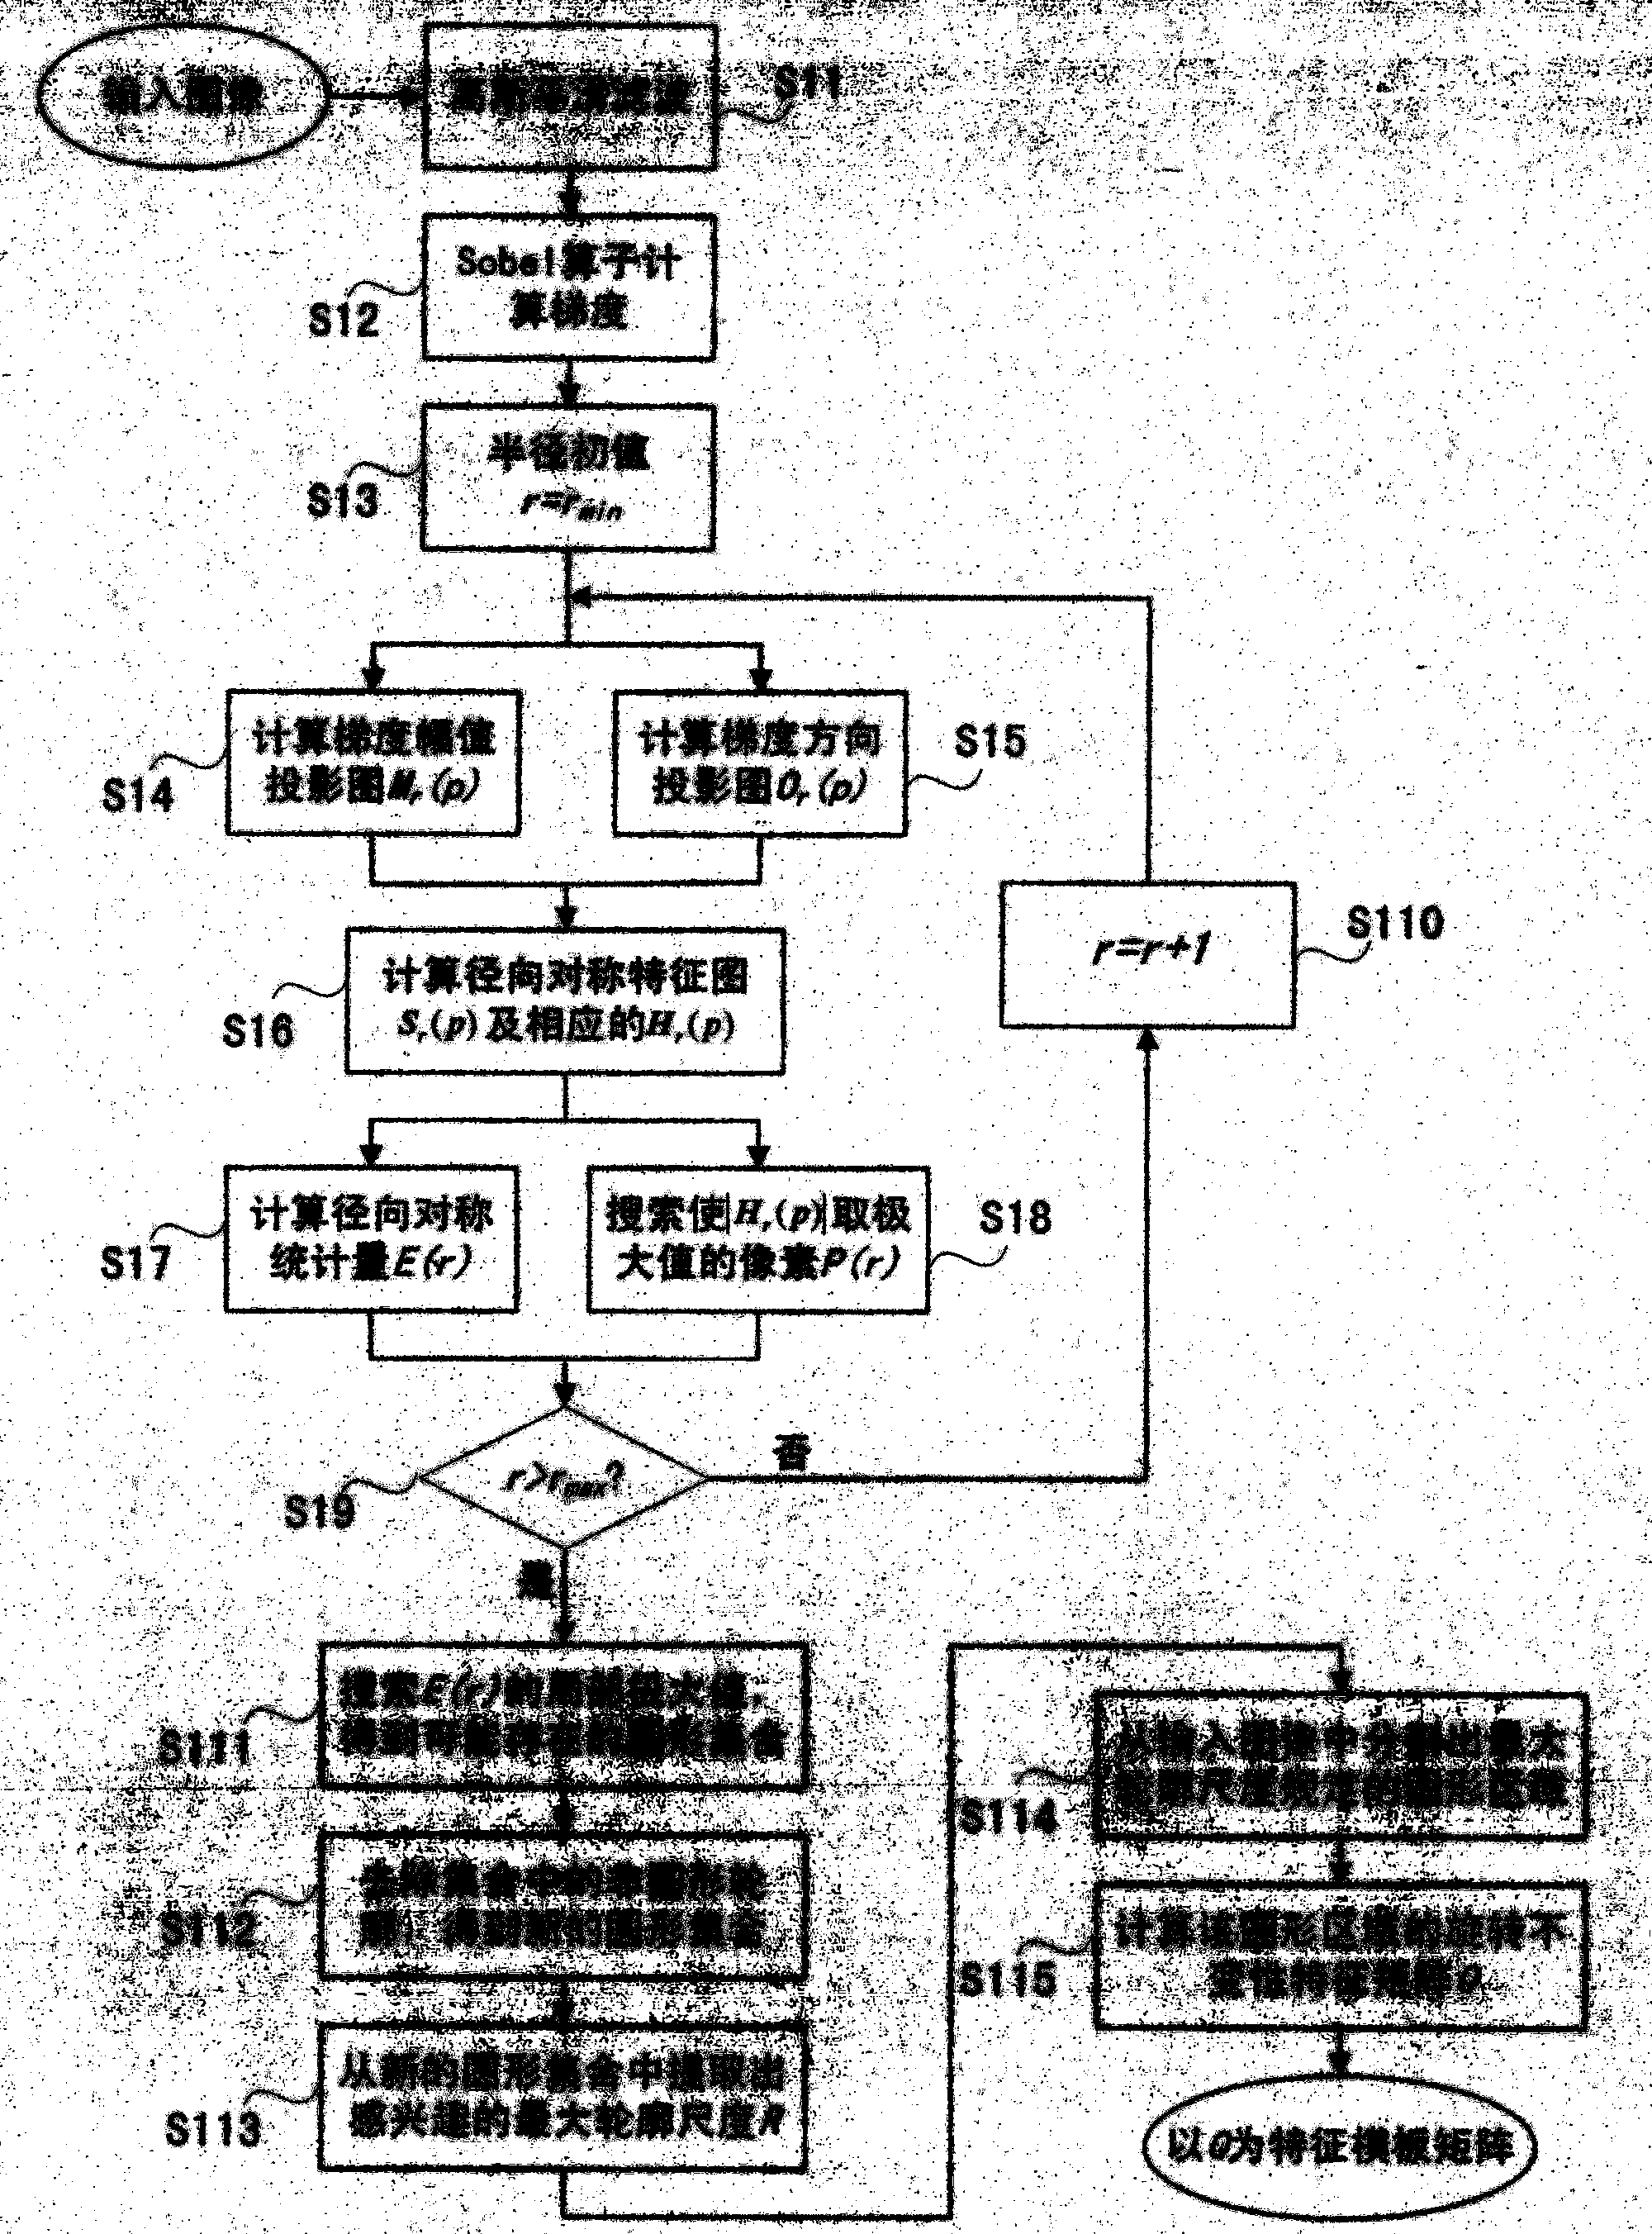 System for detecting quality of metal cap based on machine vision